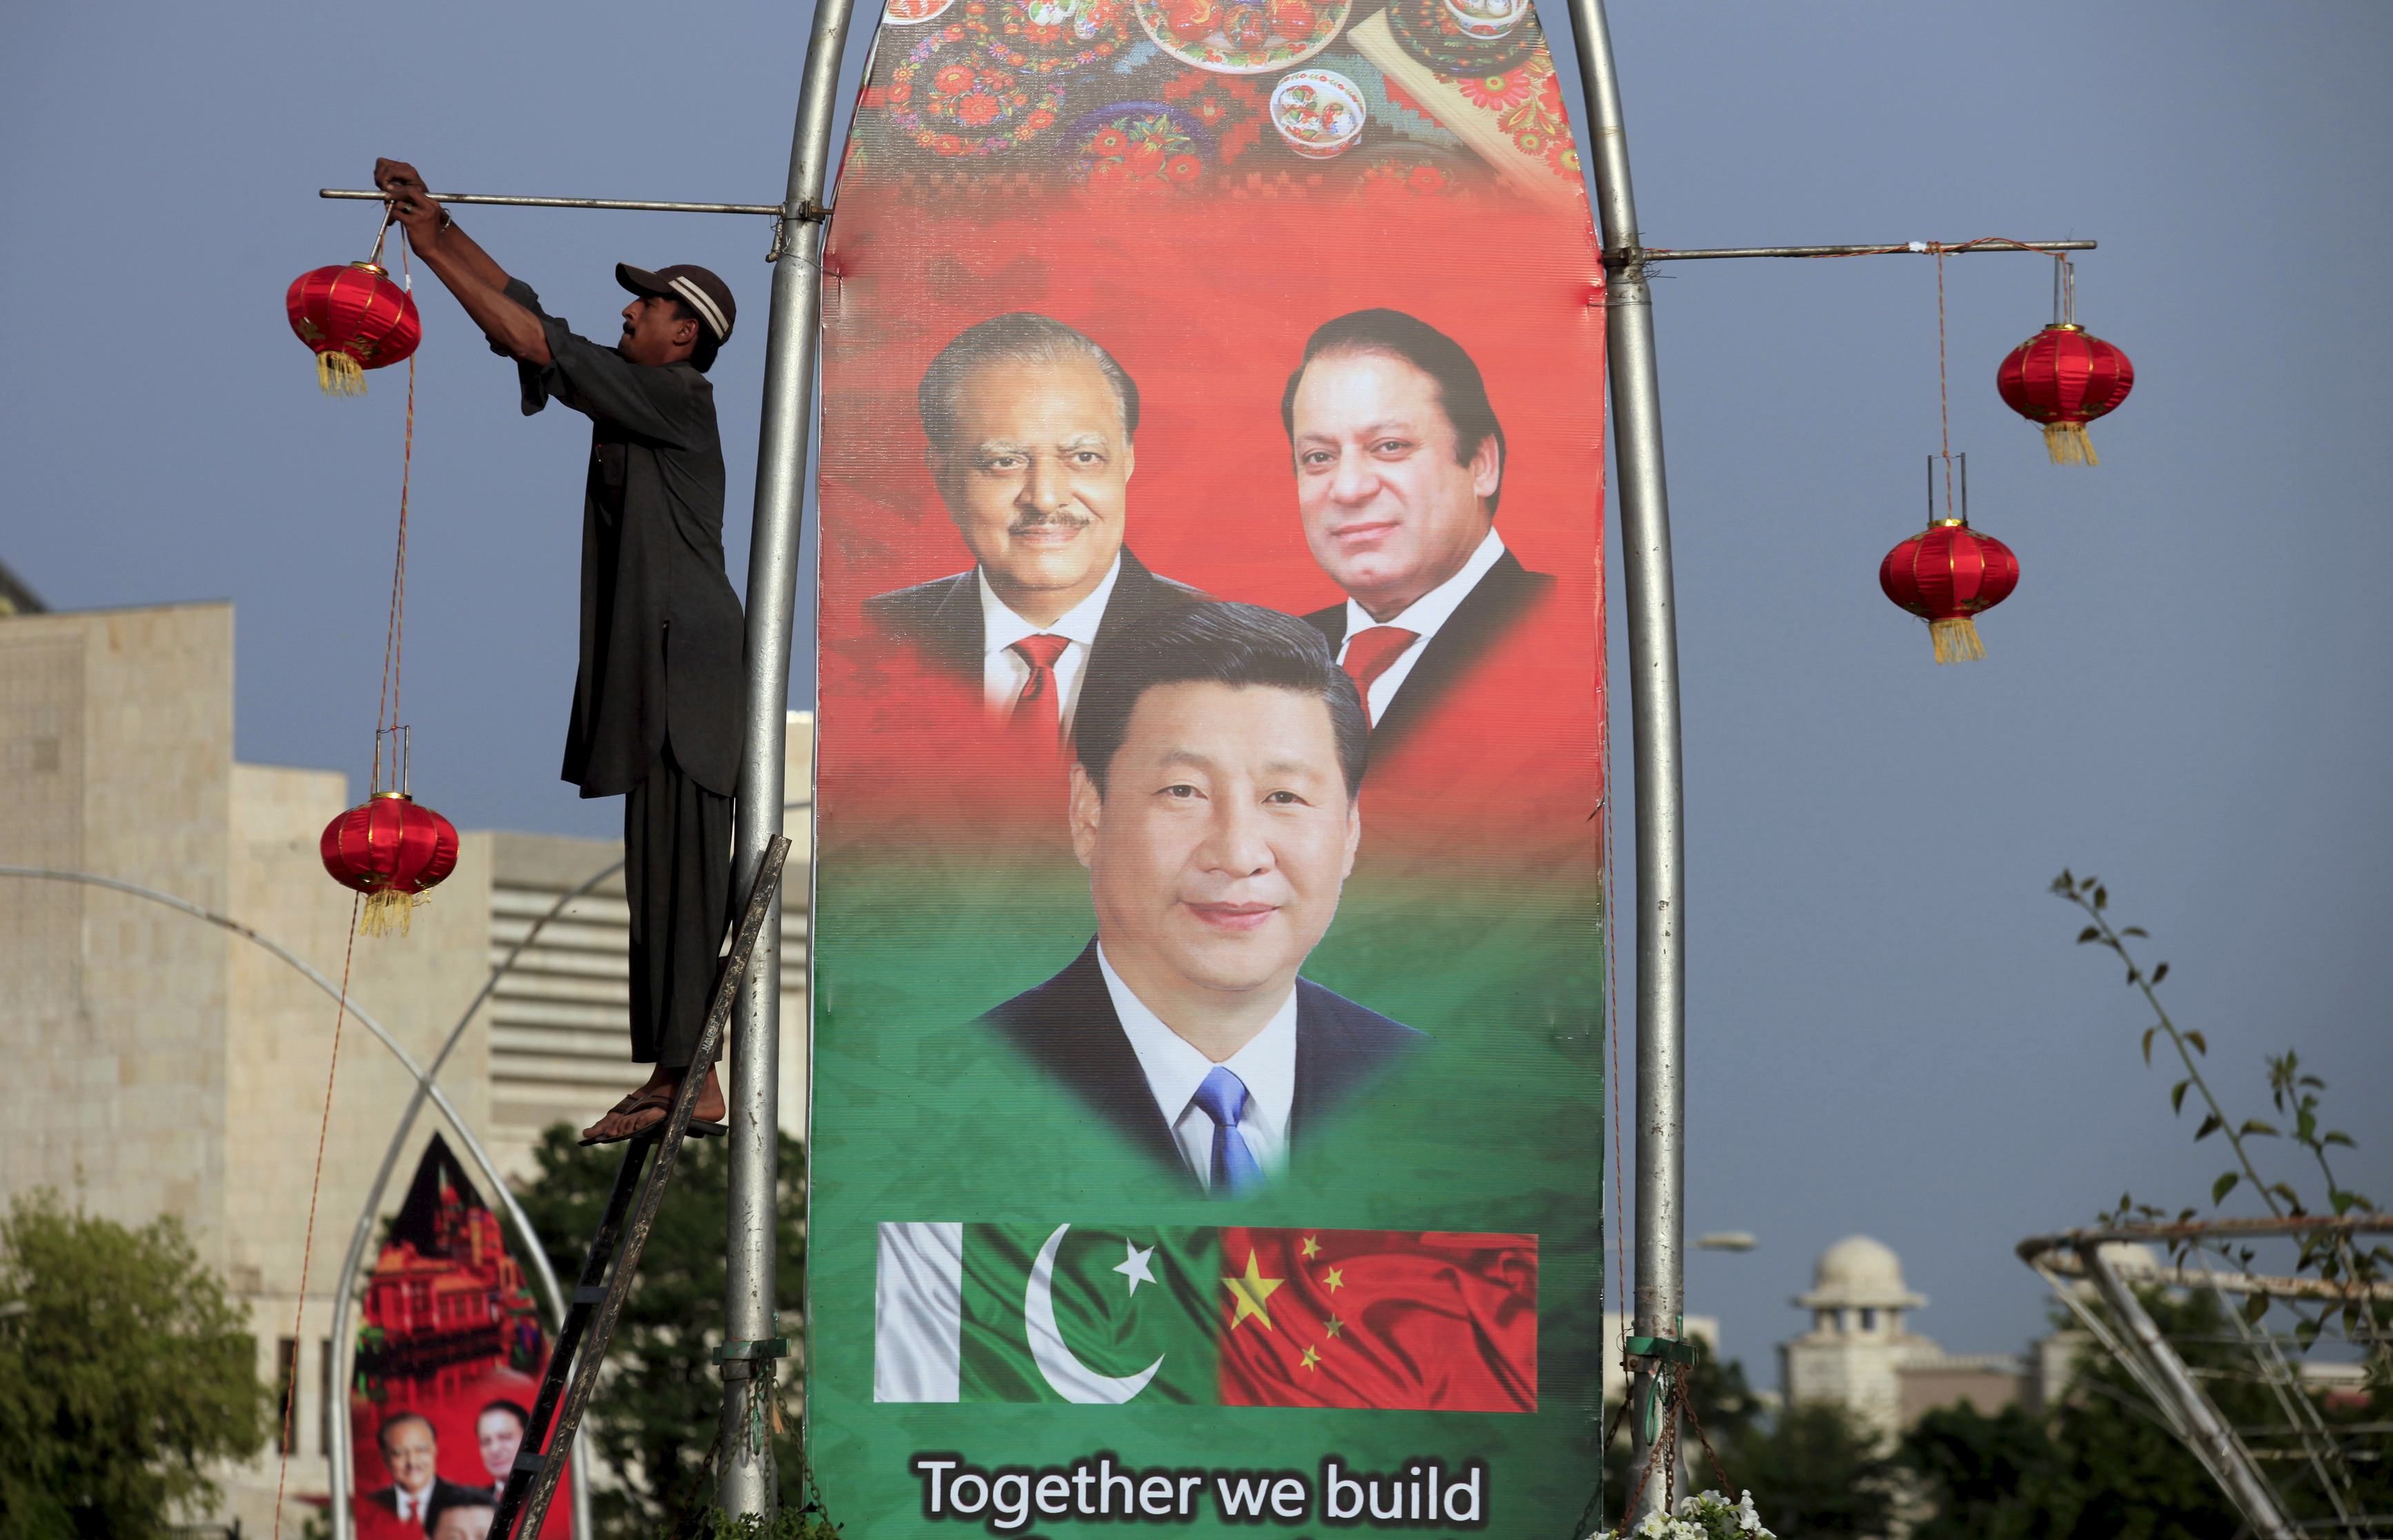 A man hangs decorations on a pole next to a banner showing Pakistan's President Hussain, China's President Xi and Pakistan's PM Sharif, ahead of Xi's visit to Islamabad